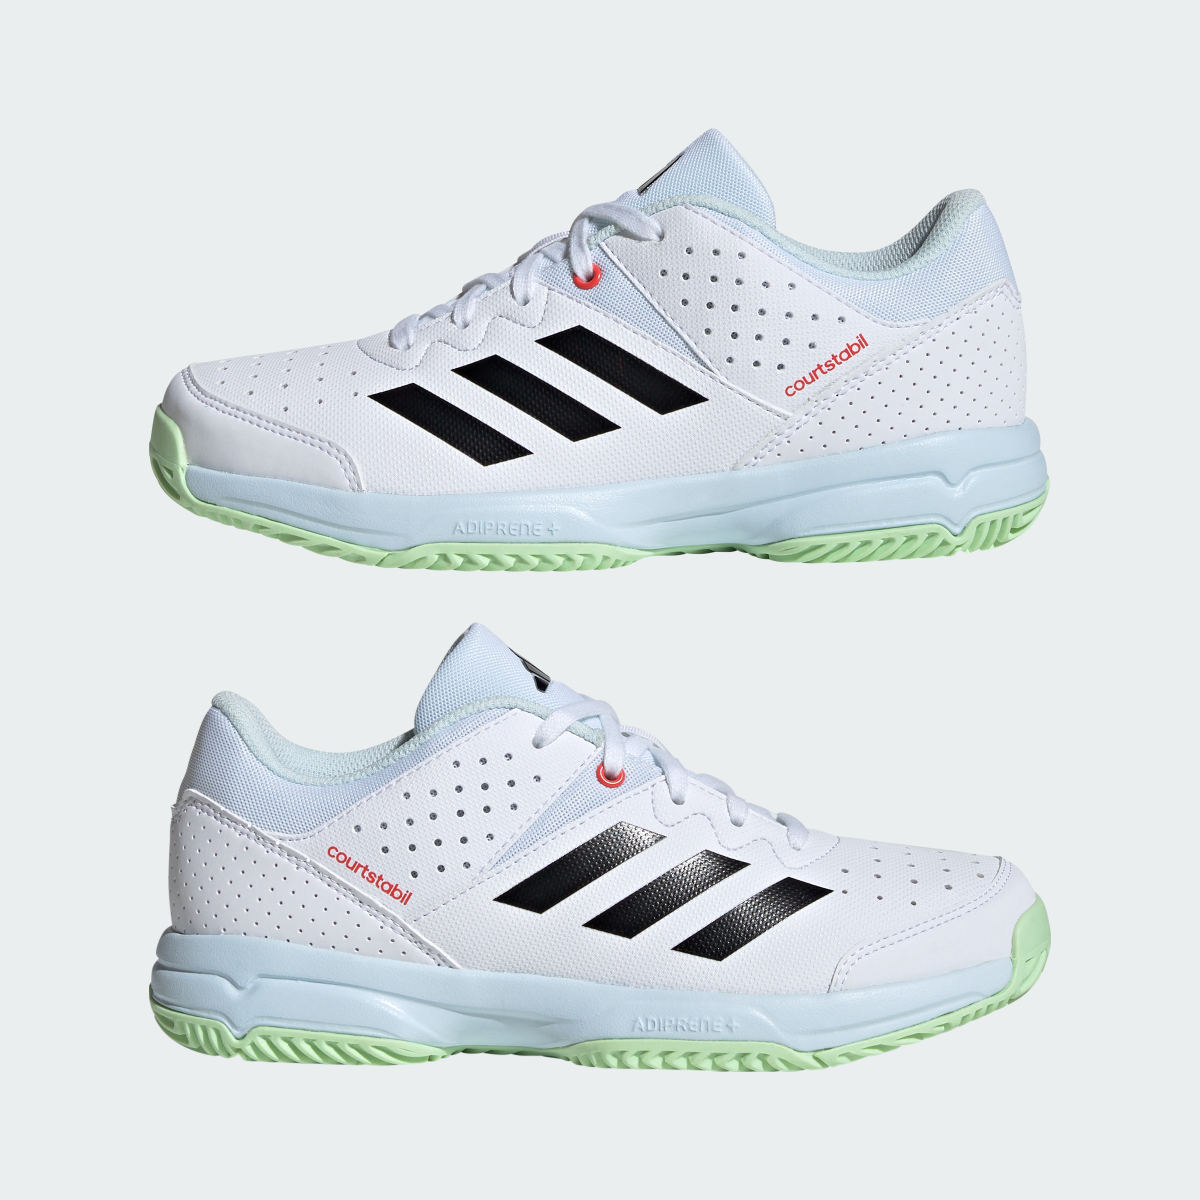 Adidas Court Stabil Shoes. 7